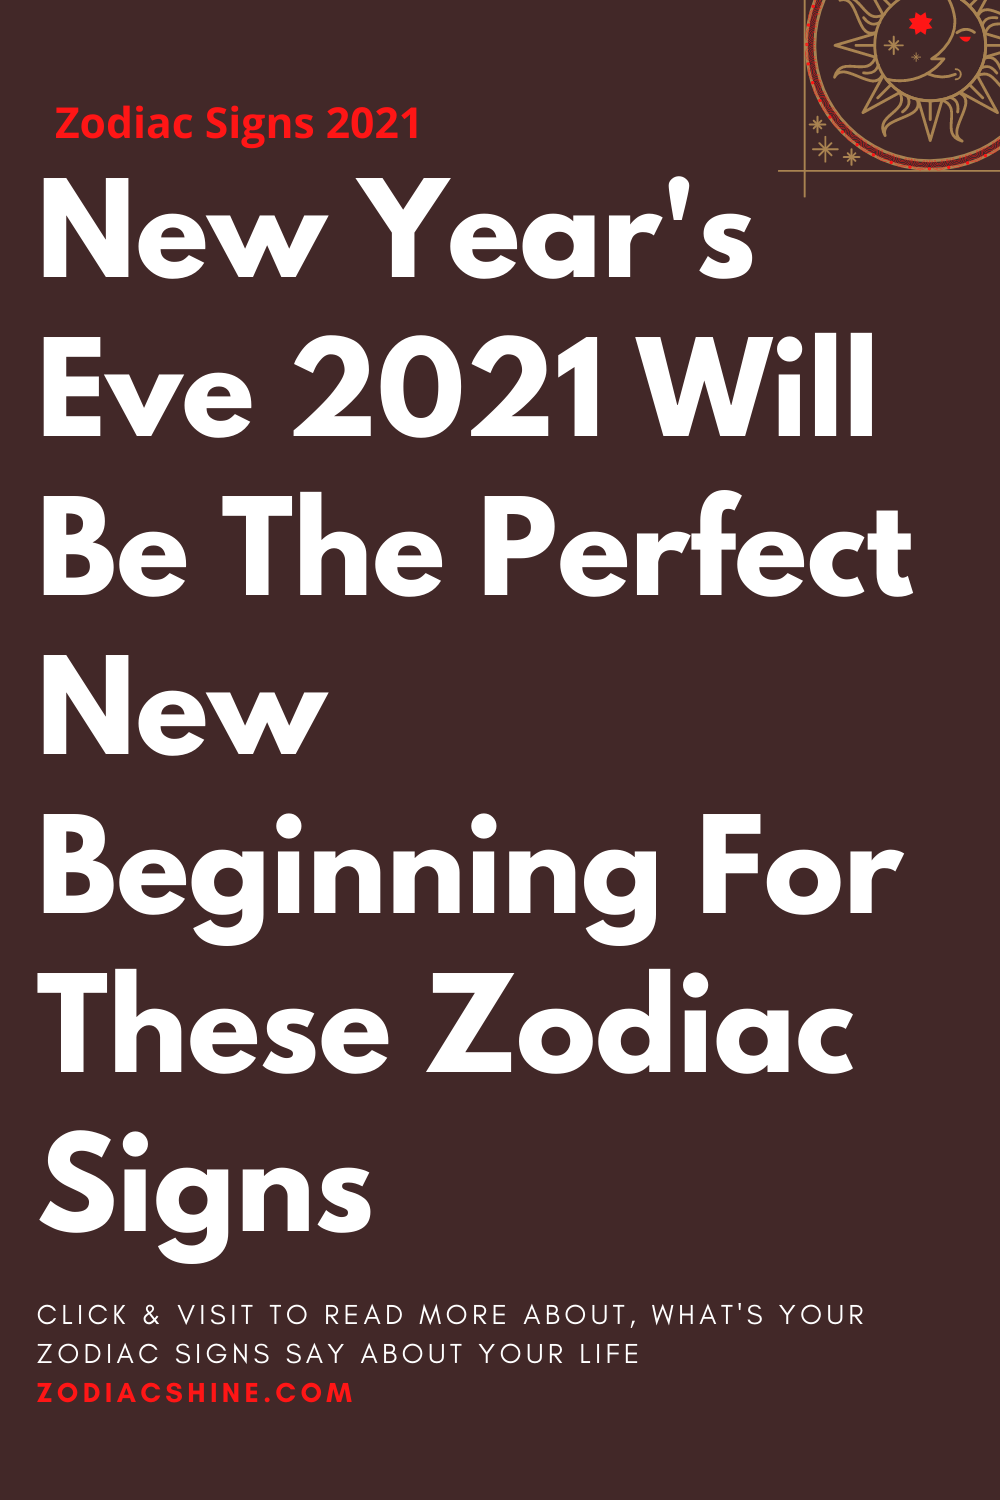 New Year's Eve 2021 Will Be The Perfect New Beginning For These Zodiac Signs